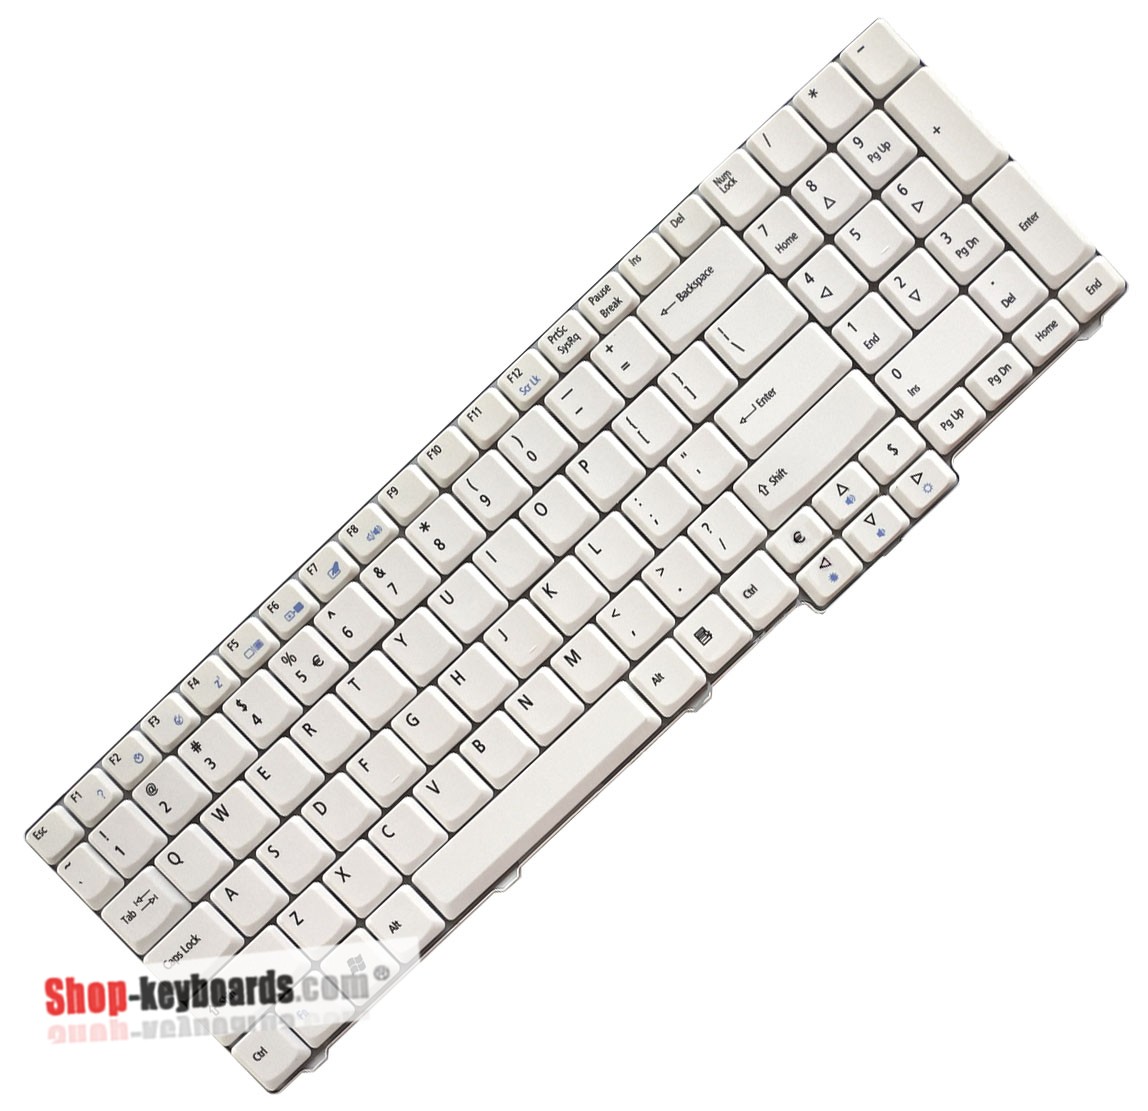 Acer TravelMate 7520G-402G25Mi Keyboard replacement